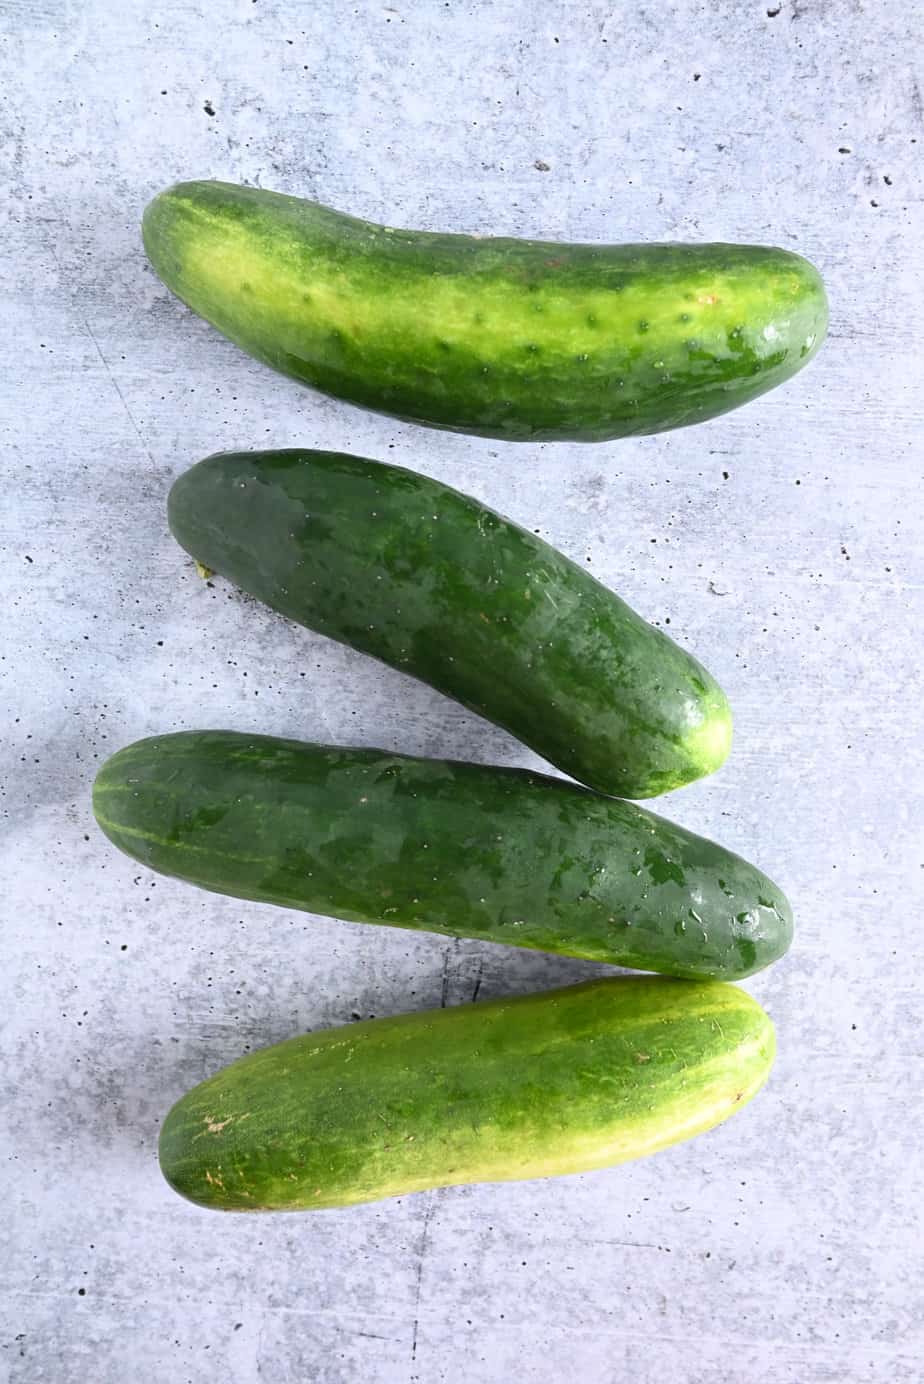 Four cucumbers arranged on a concrete countertop.